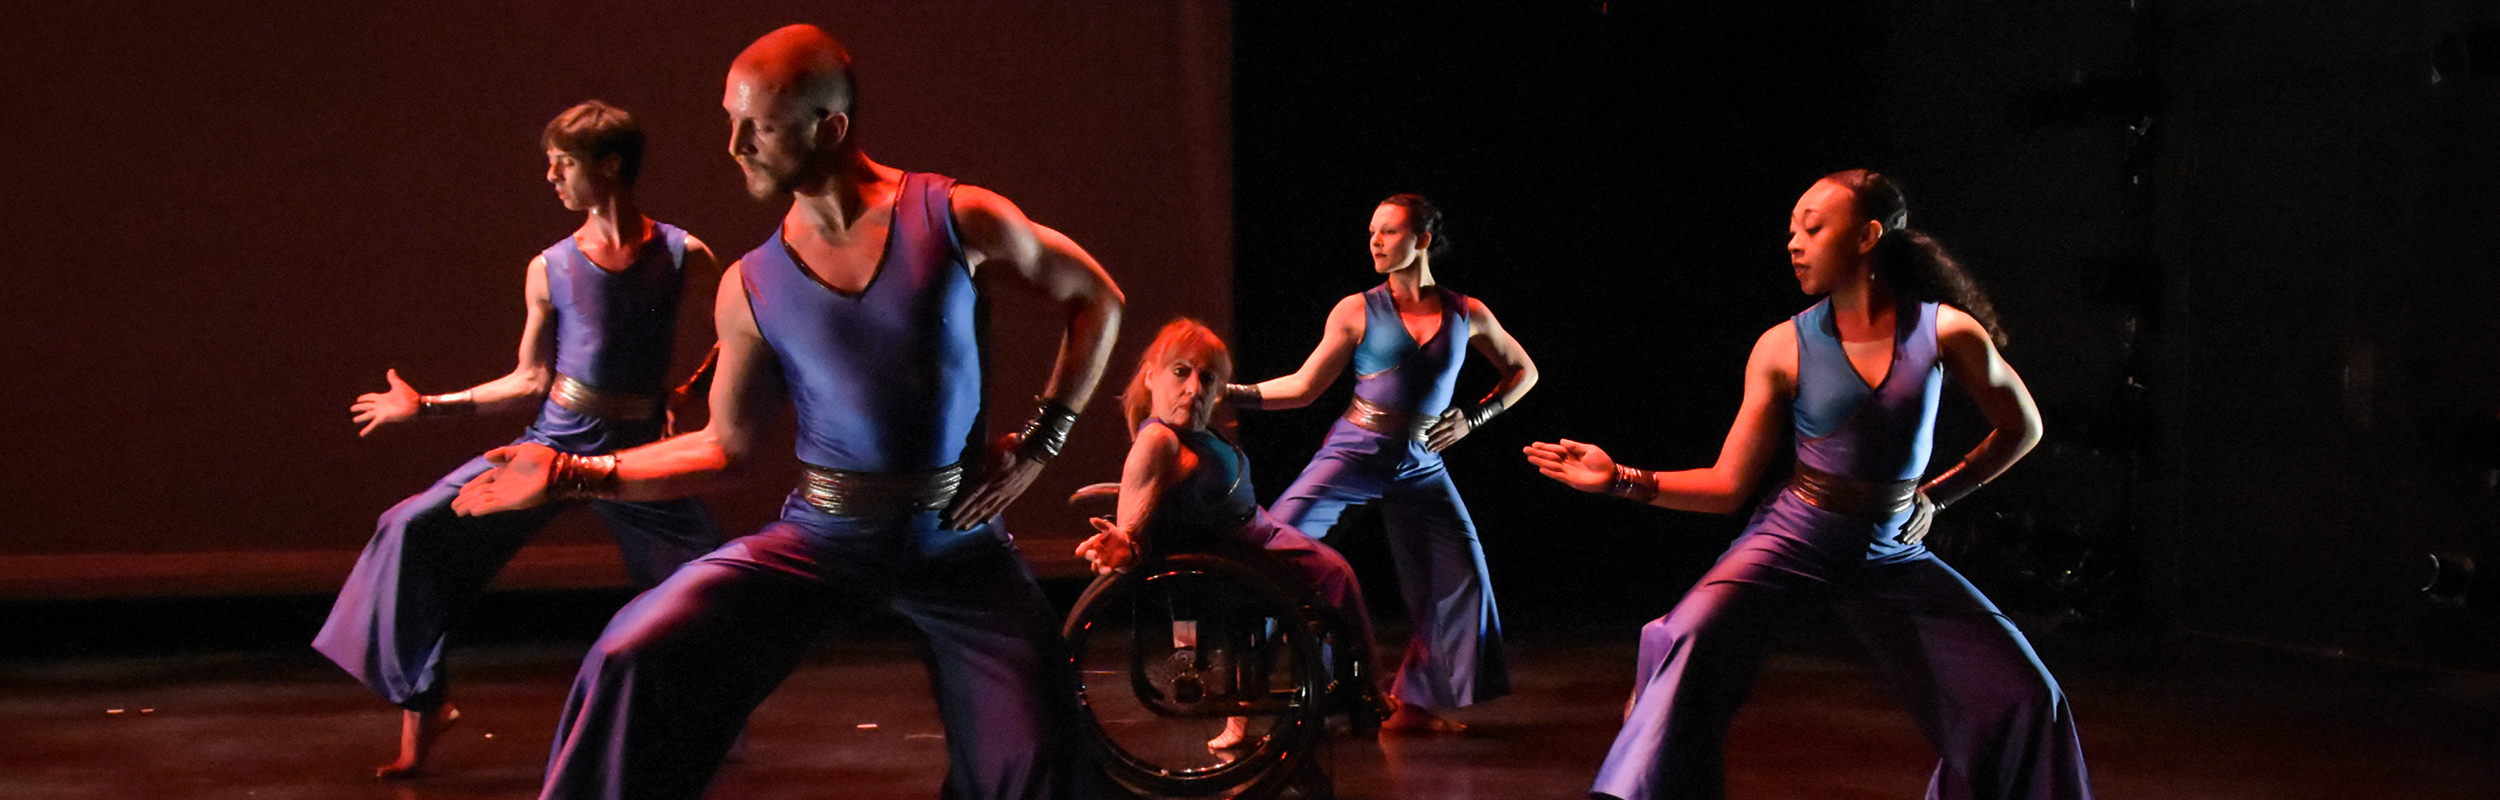 Two dancers, one standing, one in a wheelchair, crossing an arm with eachother, with a single dancer turning behind them